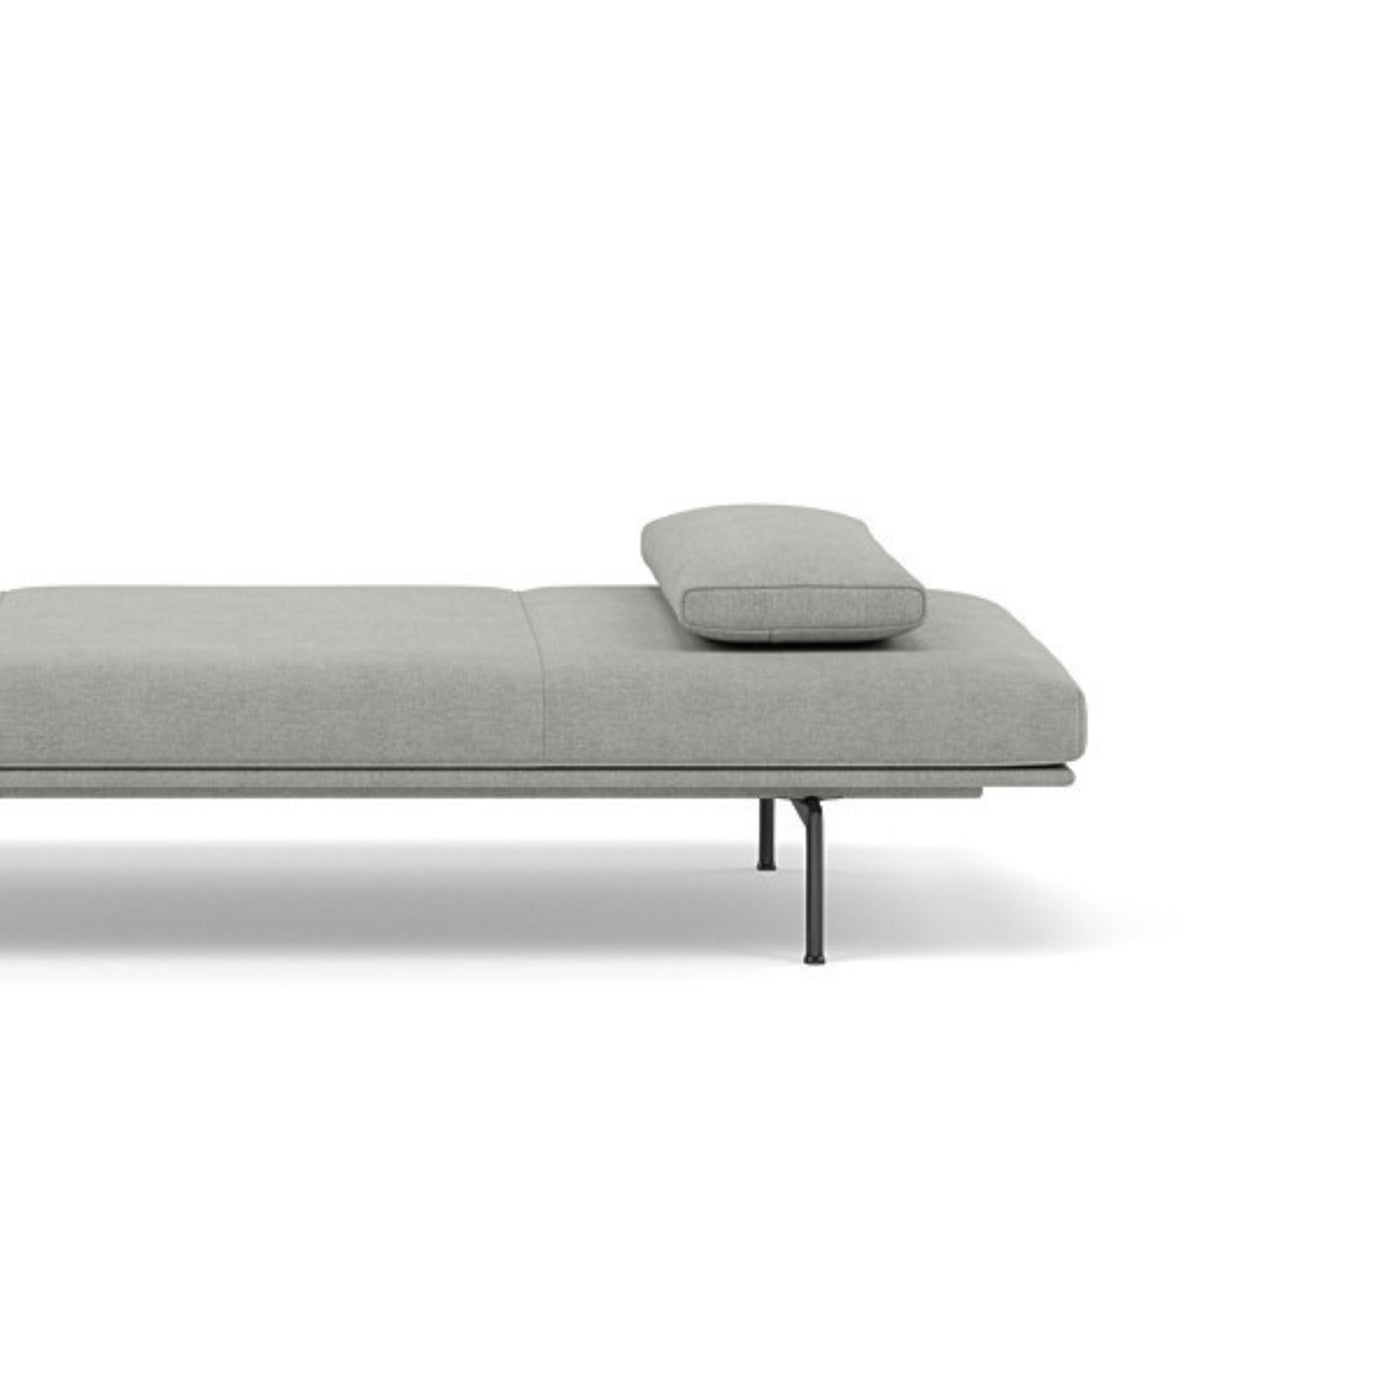 Muuto Outline Daybed Cushion, 70x30cm in fiord 151. Shop online at someday designs. #colour_fiord-151